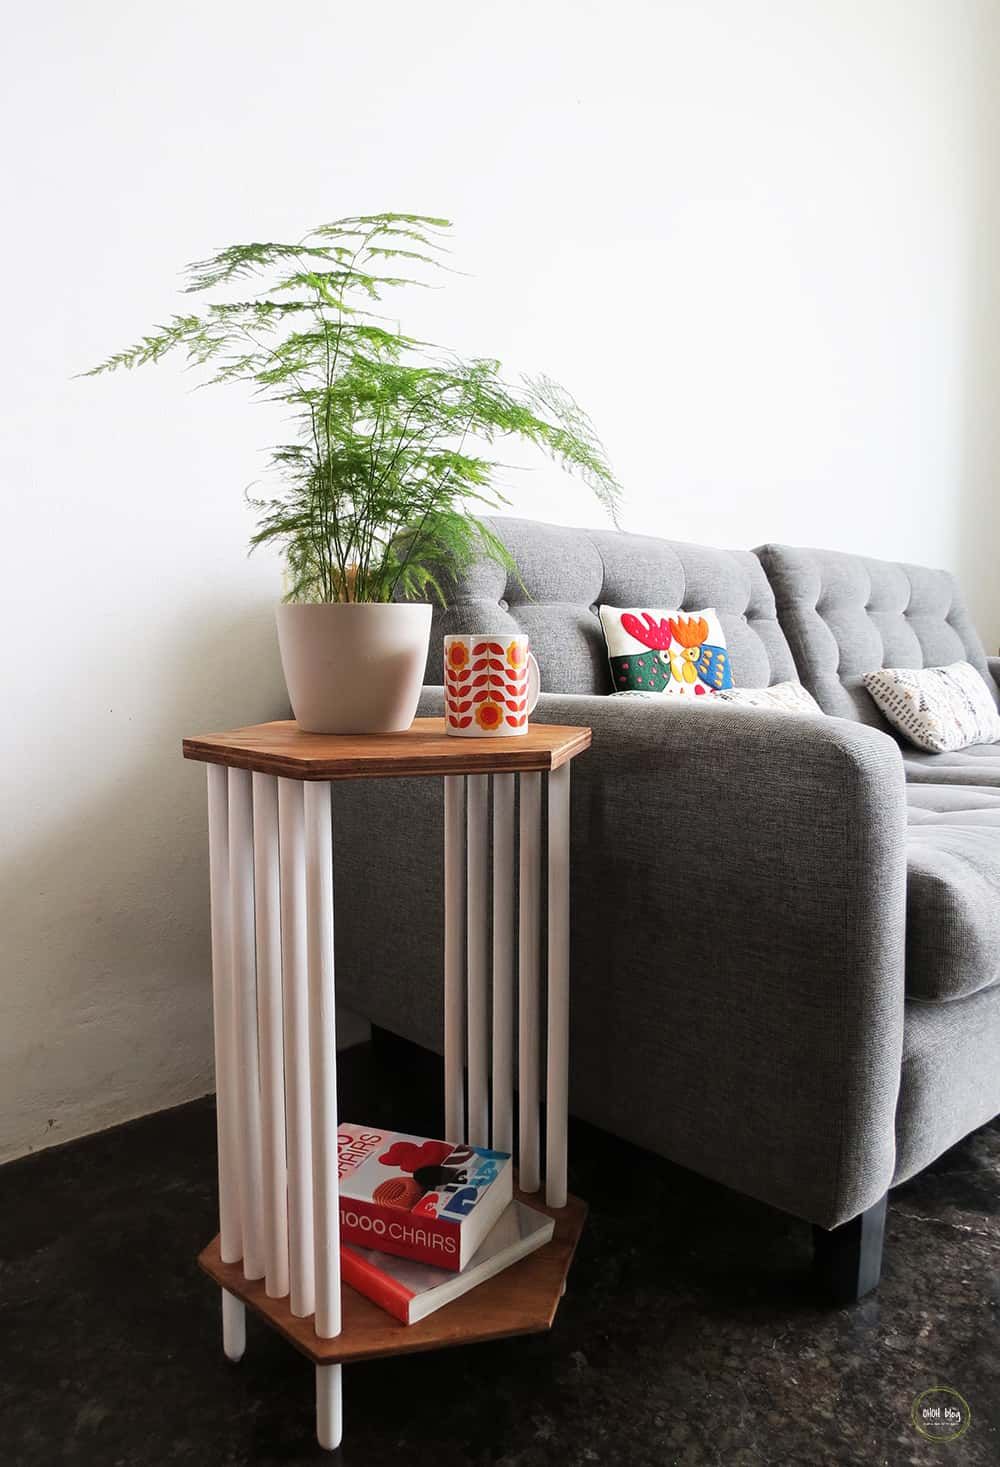 PVC pipes side table